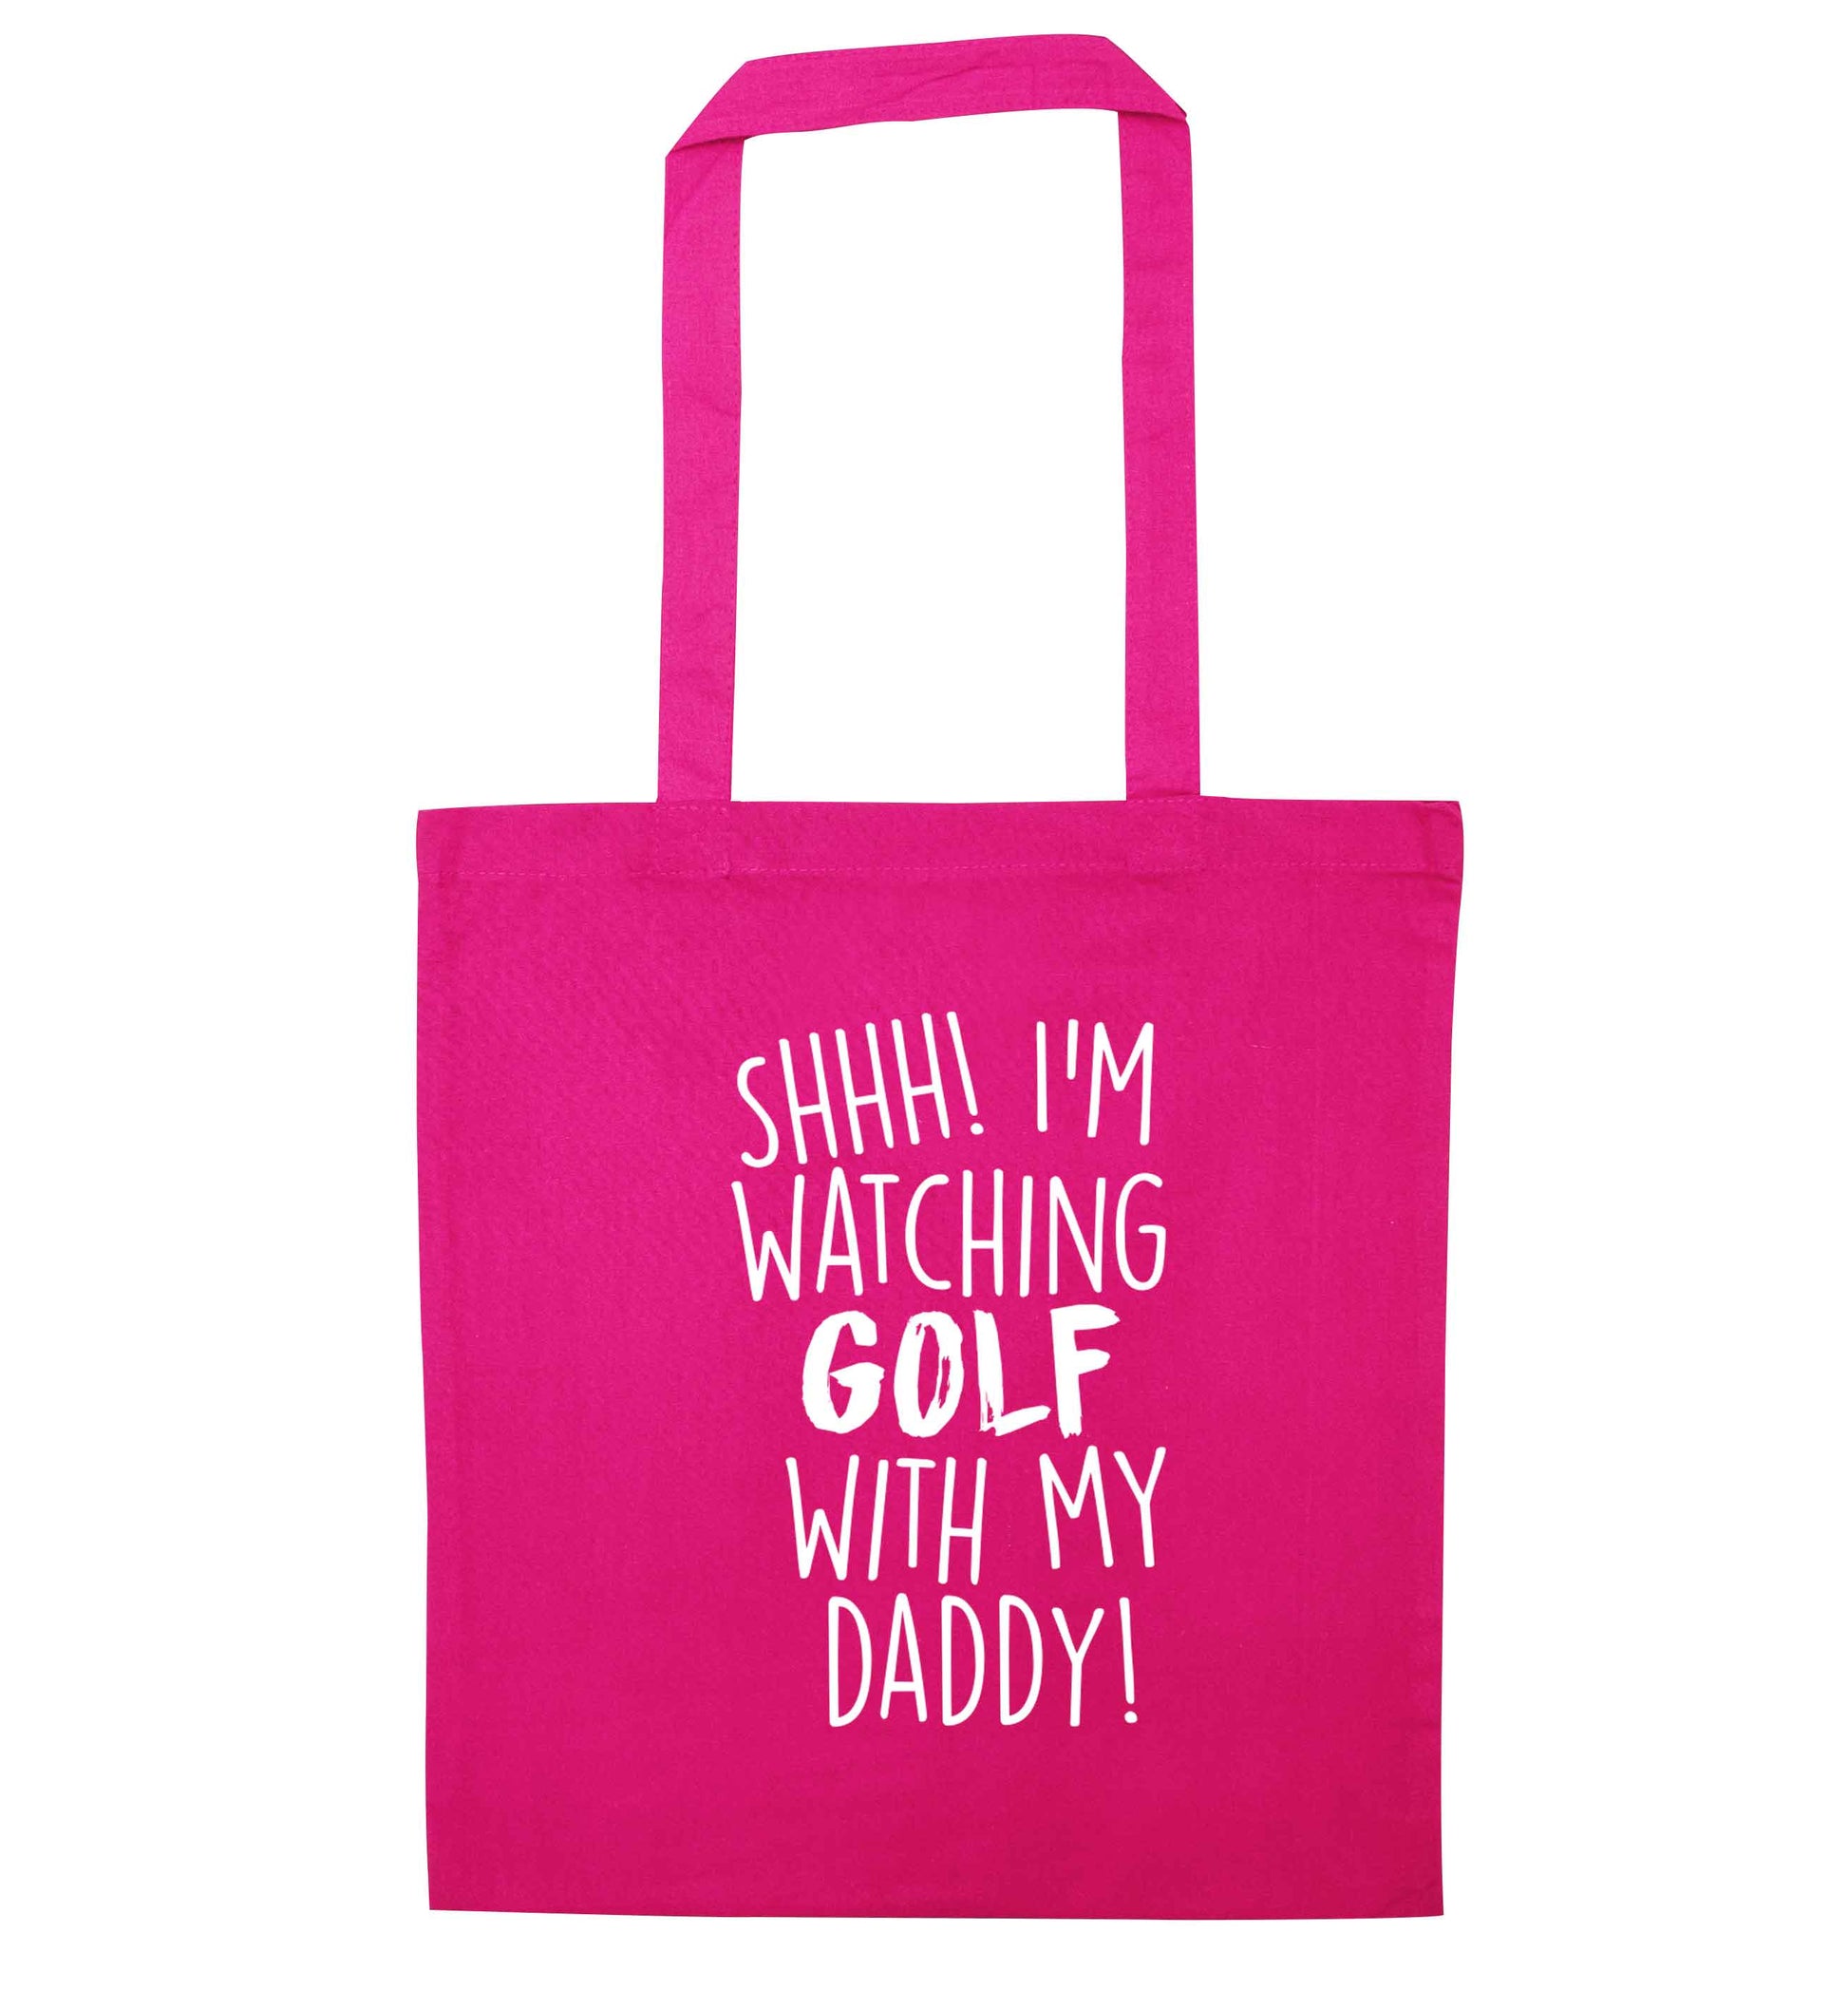 Shh I'm watching golf with my daddy pink tote bag